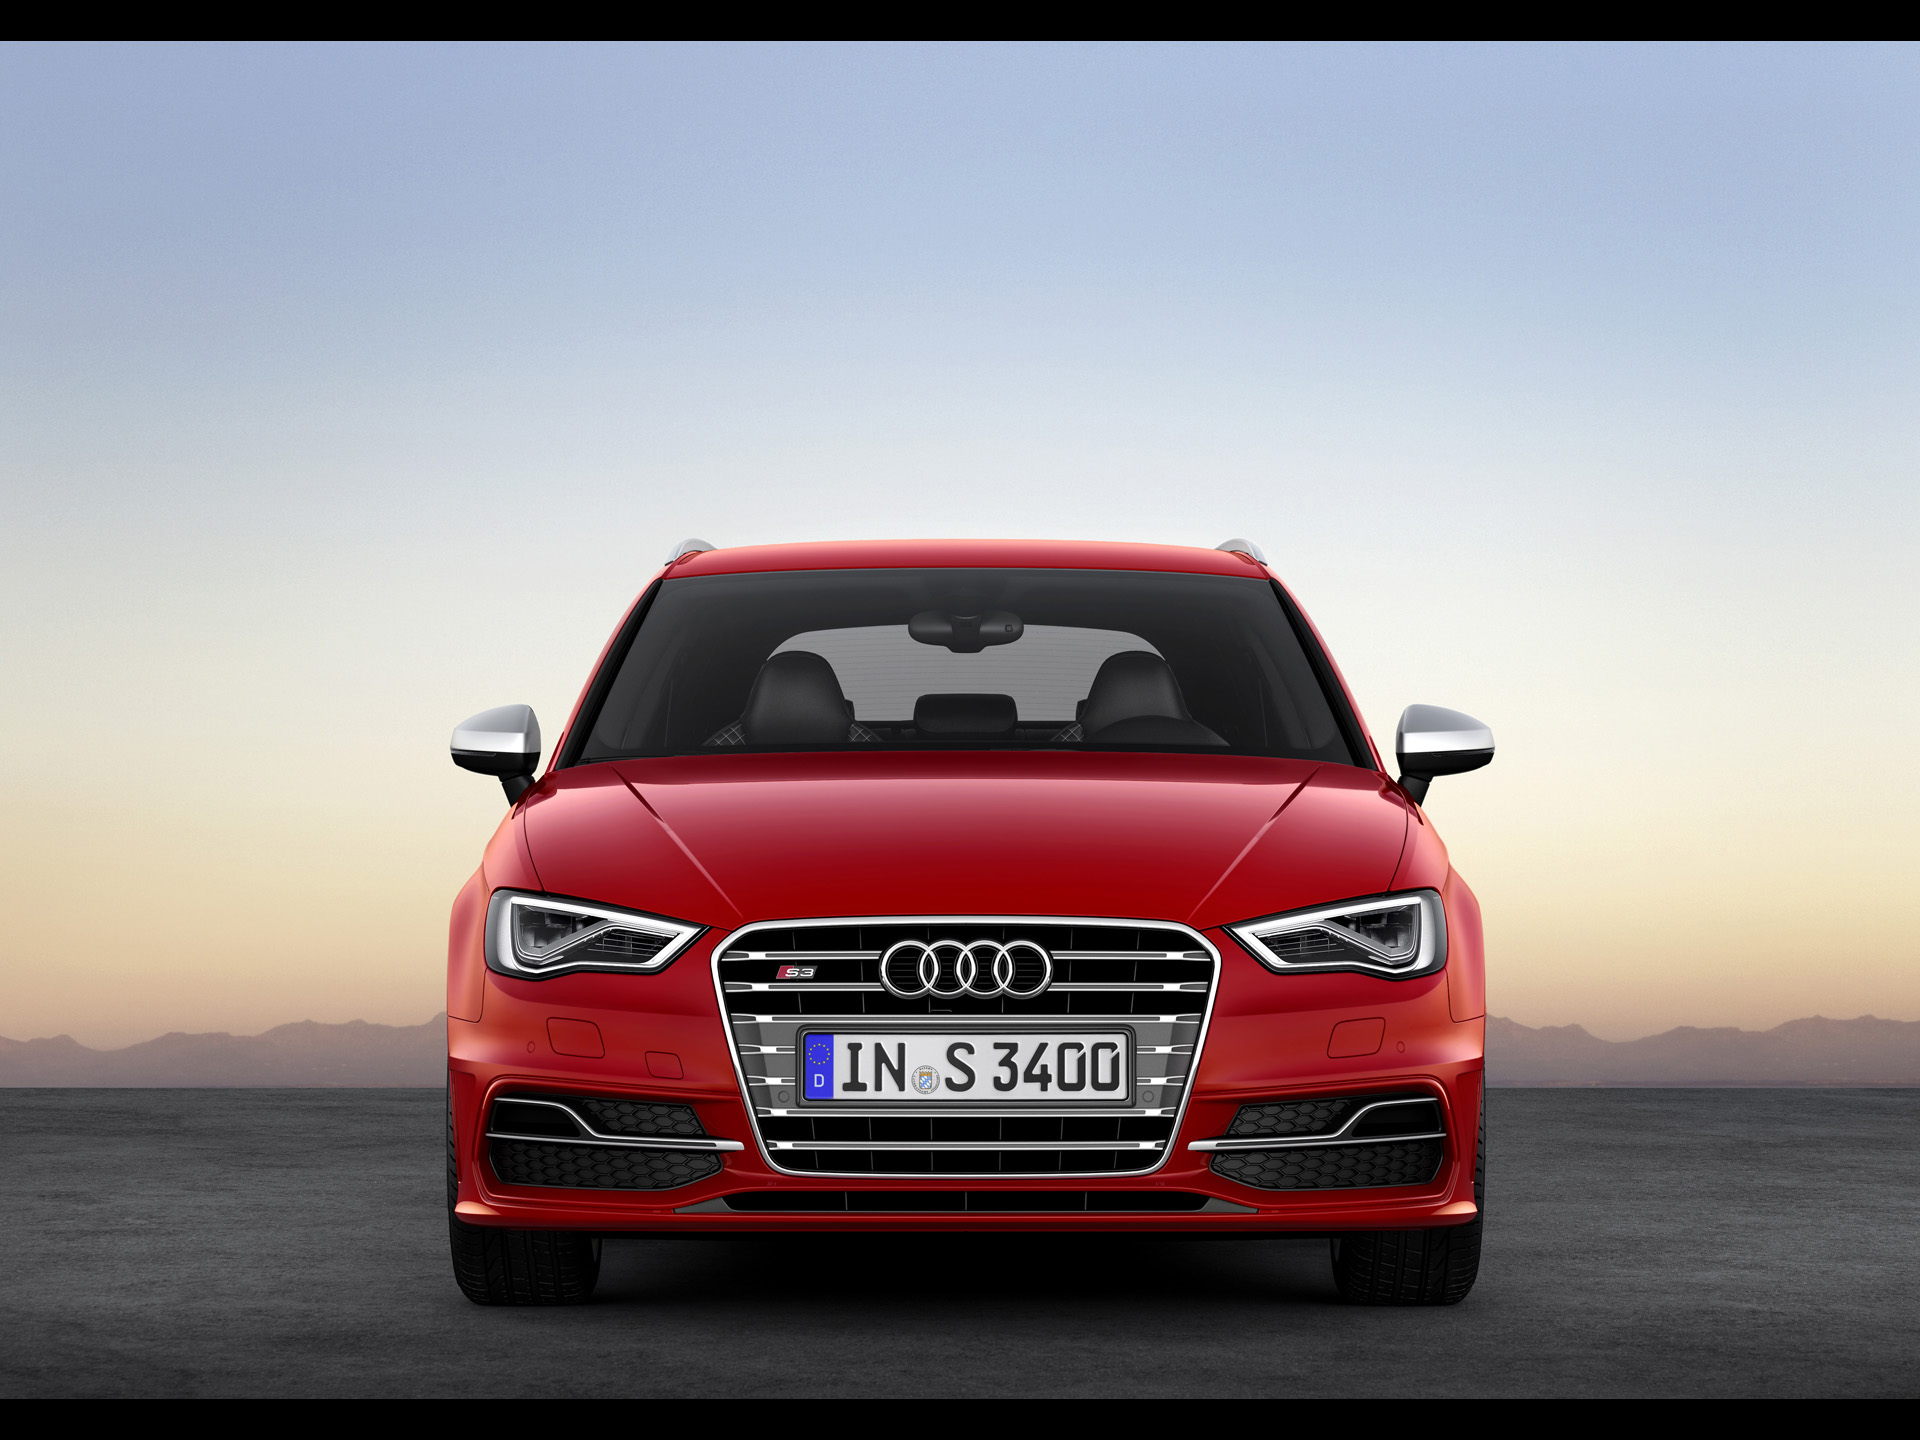 2013 Audi S3 Sportback Front Static wallpapers 2013 Audi S3 1920x1440